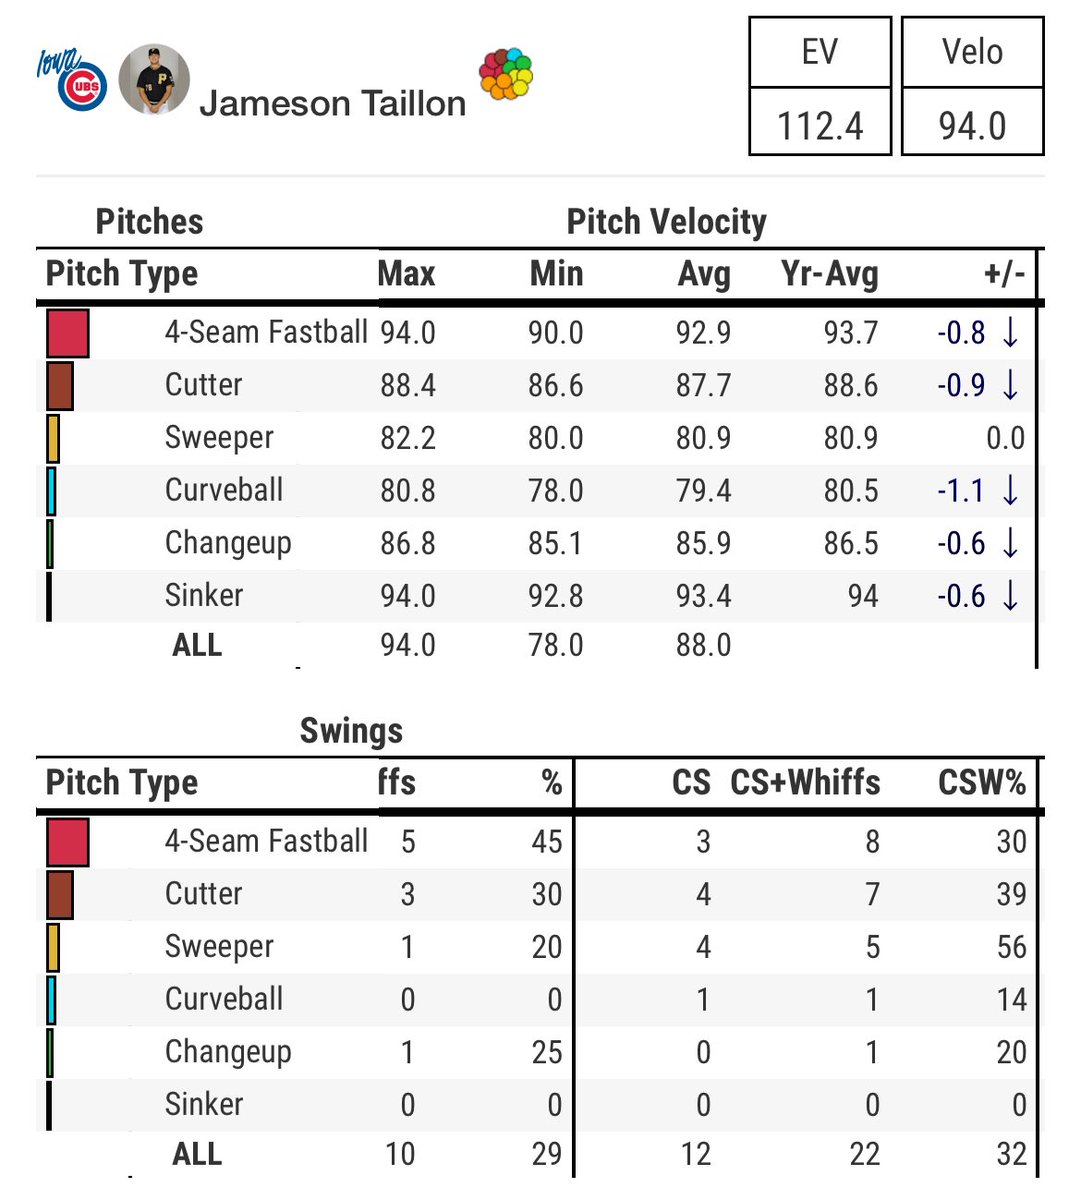 #Cubs Jameson Taillon had a better 2nd rehab start yesterday. Only reached 3 IP and 68 pitches. Velo down just a little bit as he works back up. Not concerned personally. Could see him making one more rehab start or if he does make his debut next week it’ll be a pitch limit…